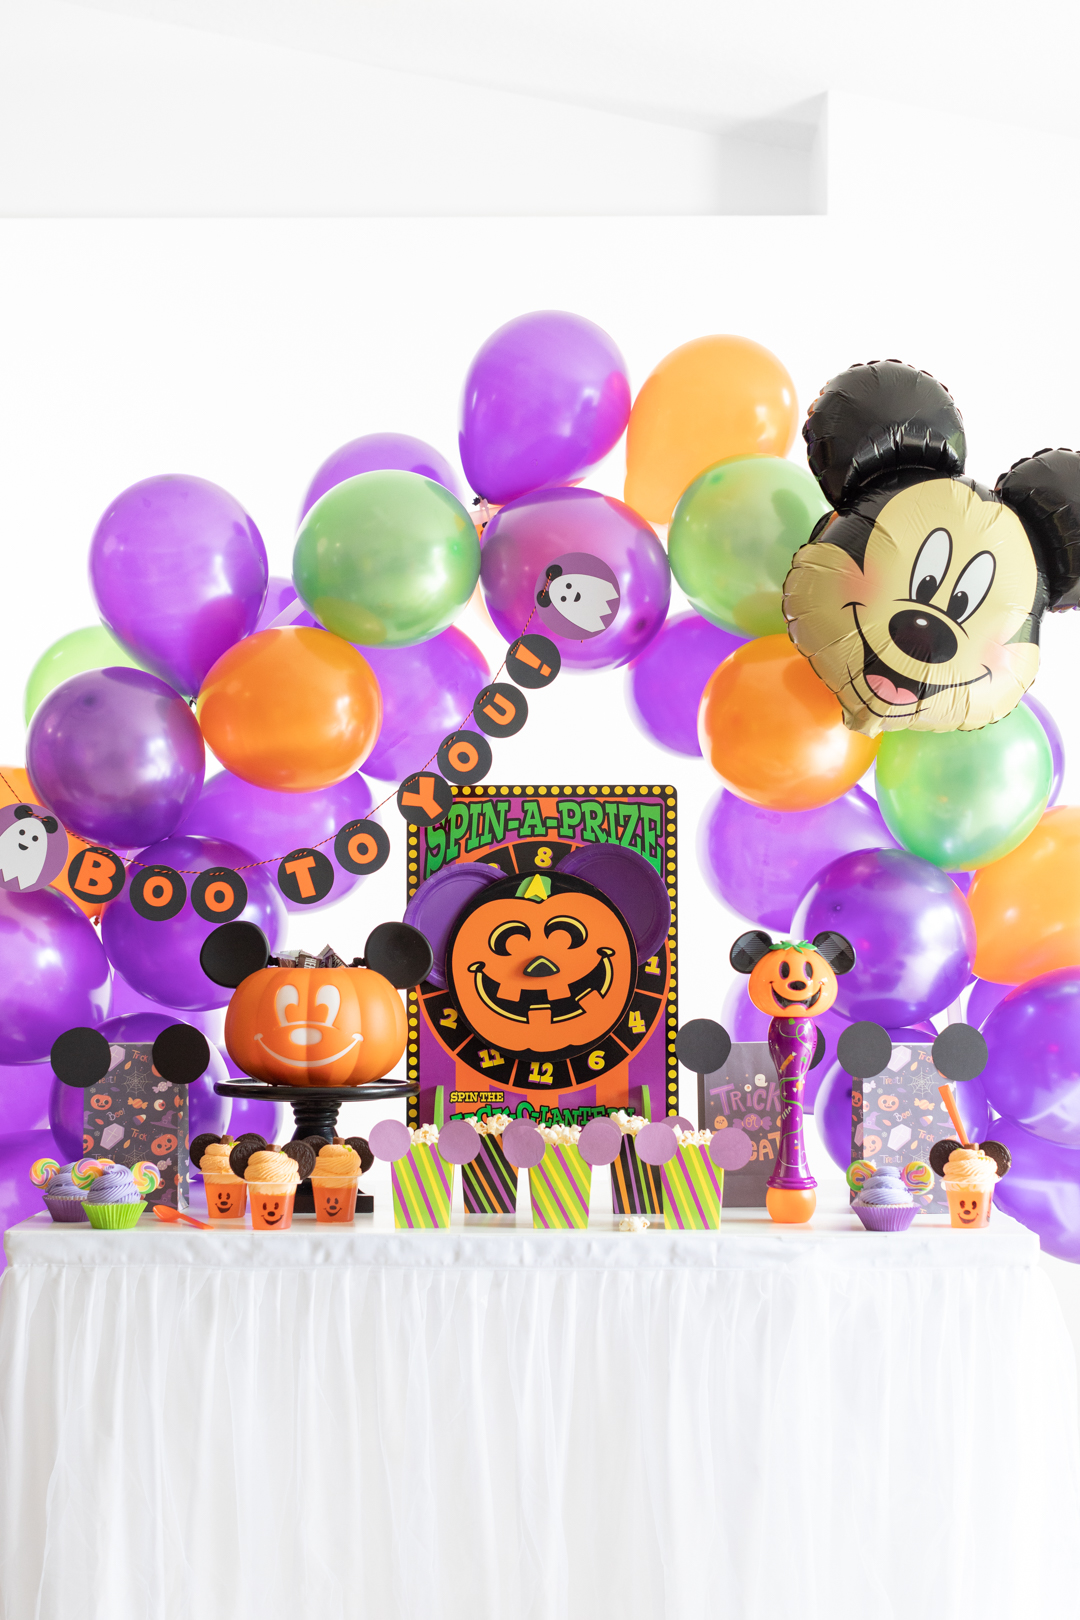 boo to you disney halloween party at home party table. green, purple, orange theme with large mickey mouse balloon